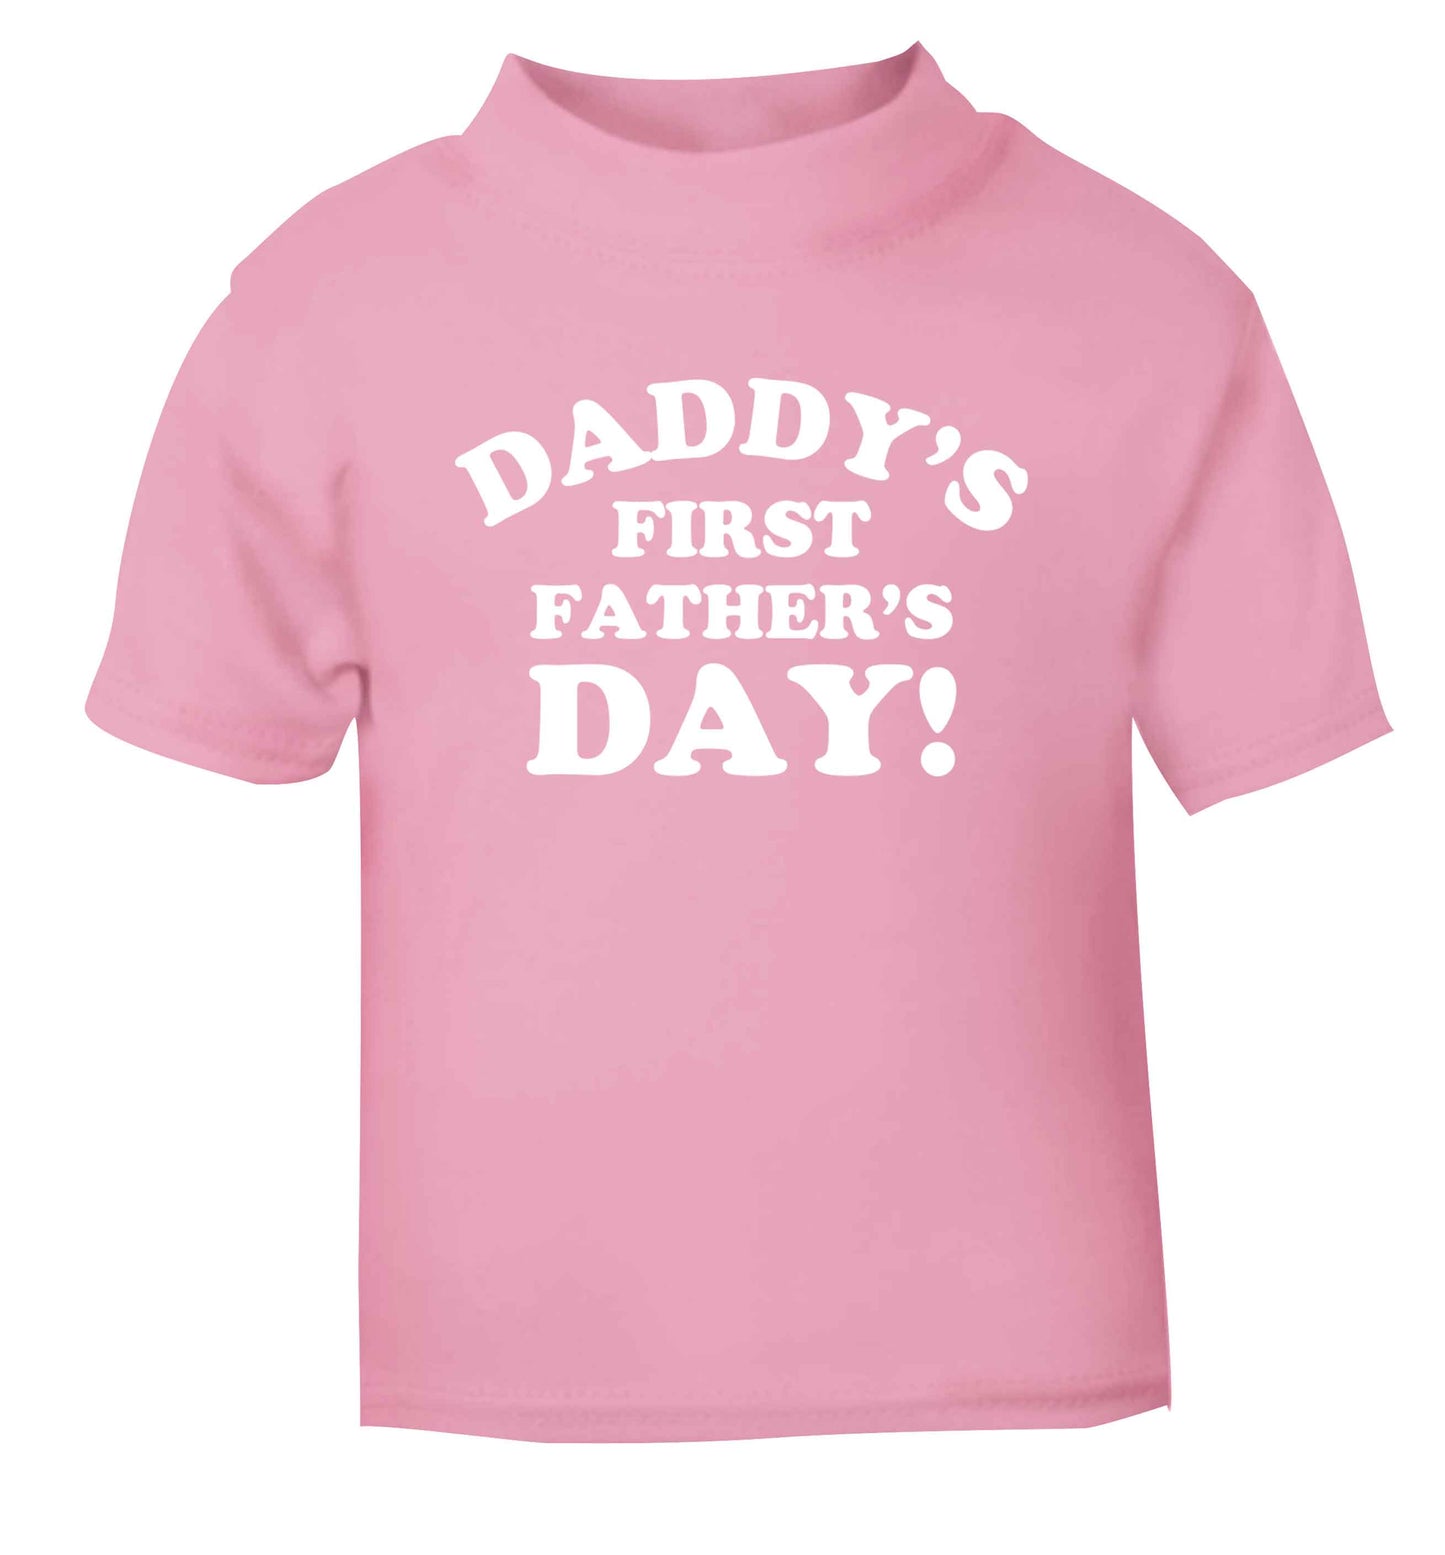 Daddy's first father's day light pink baby toddler Tshirt 2 Years